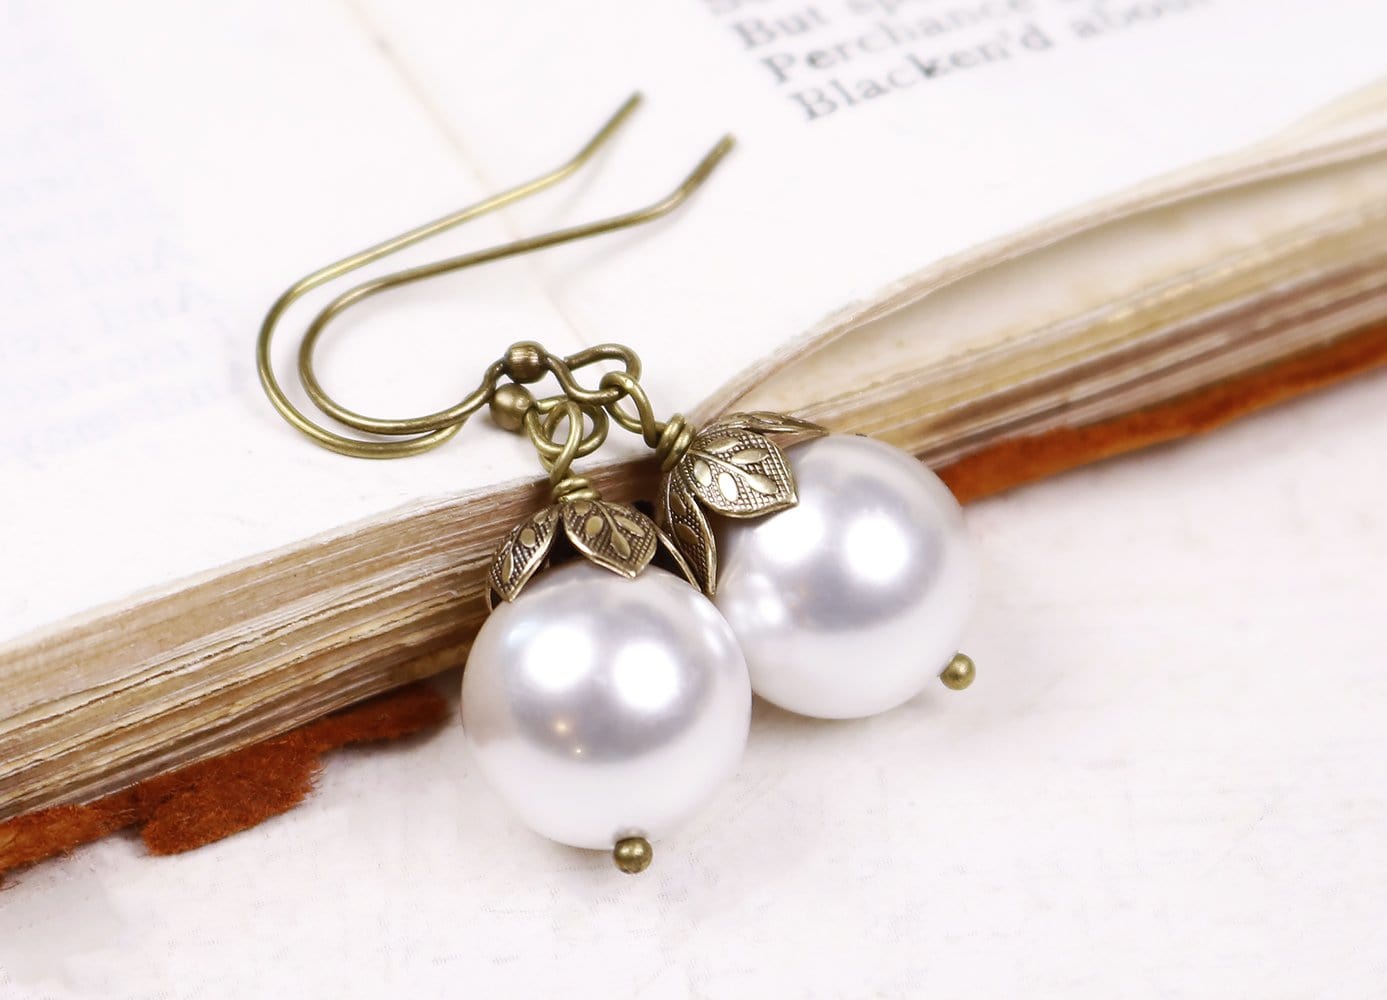 Aquitaine Pearl Drop Earrings in White Pearl and Antiqued Brass by Rabbitwood and Reason